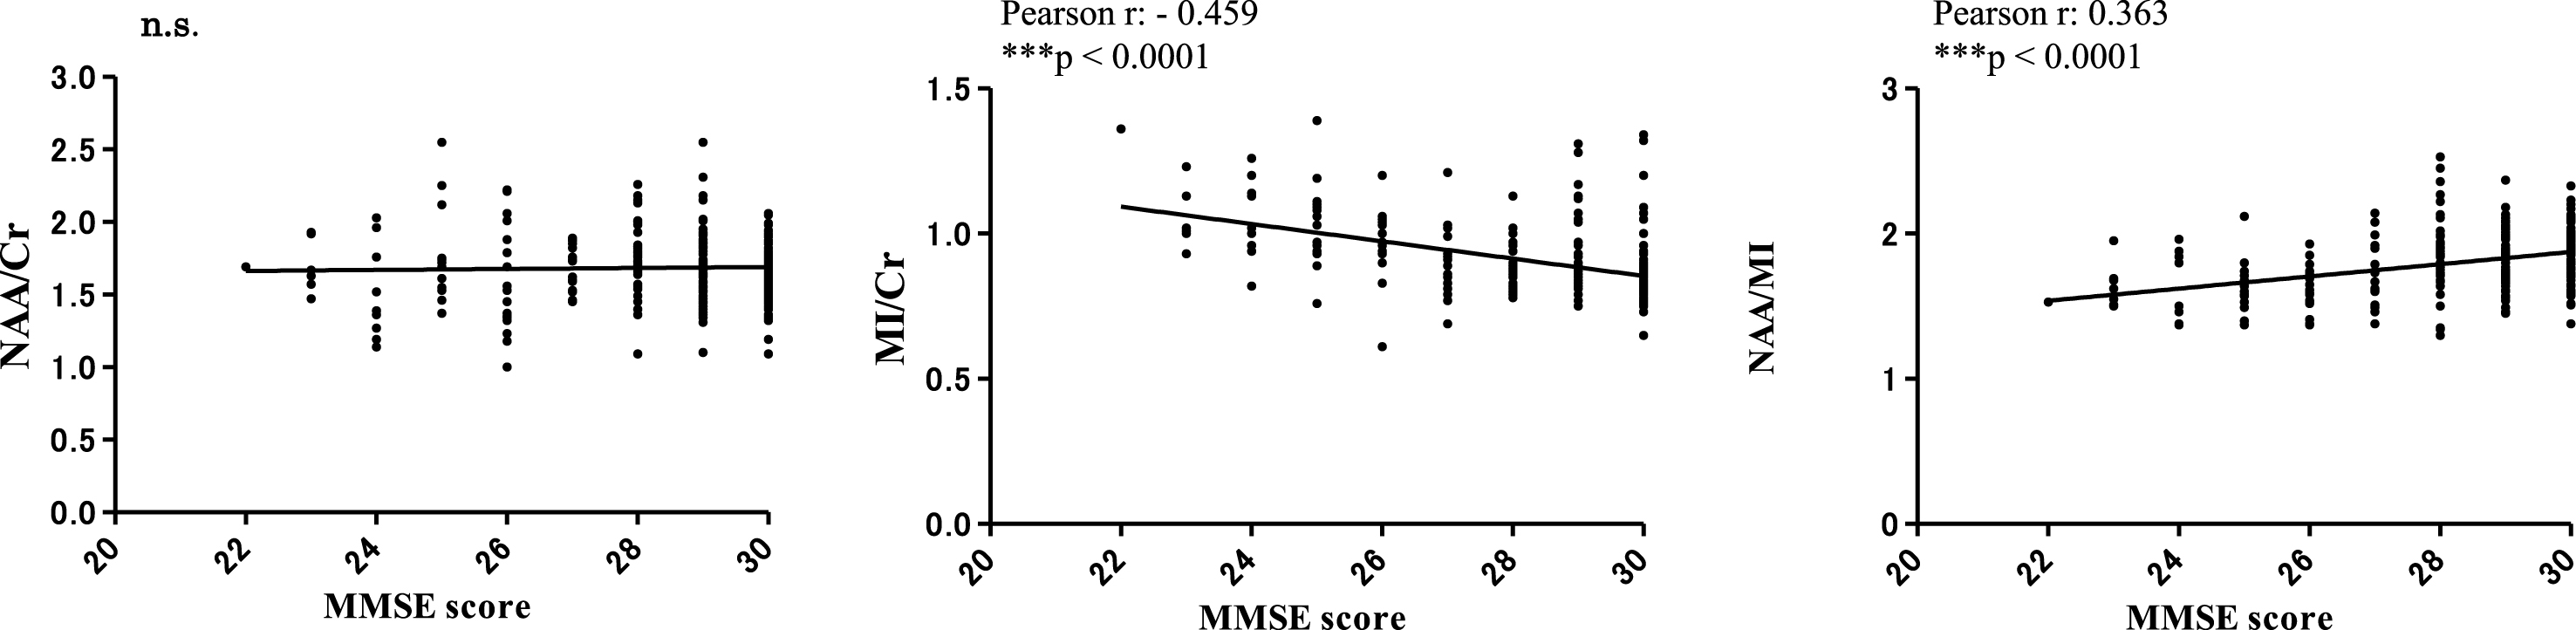 Correlations between MRS metabolites (NAA/Cr, MI/Cr and NAA/MI) and MMSE scores 7 years after baseline. There were no significant correlations between MMSE scores and the NAA/Cr ratio. The MI/Cr ratio was negatively correlated with MMSE scores (Pearson r: –0.459, ***p < 0.0001). The NAA/MI ratio was positively correlated with MMSE scores (Pearson r: 0.363, ***p < 0.0001). The results did not reveal a significant correlation between the NAA/MI ratio and CSF-Aβ42 or CSF-p-tau levels at 7 years from baseline (data not shown).